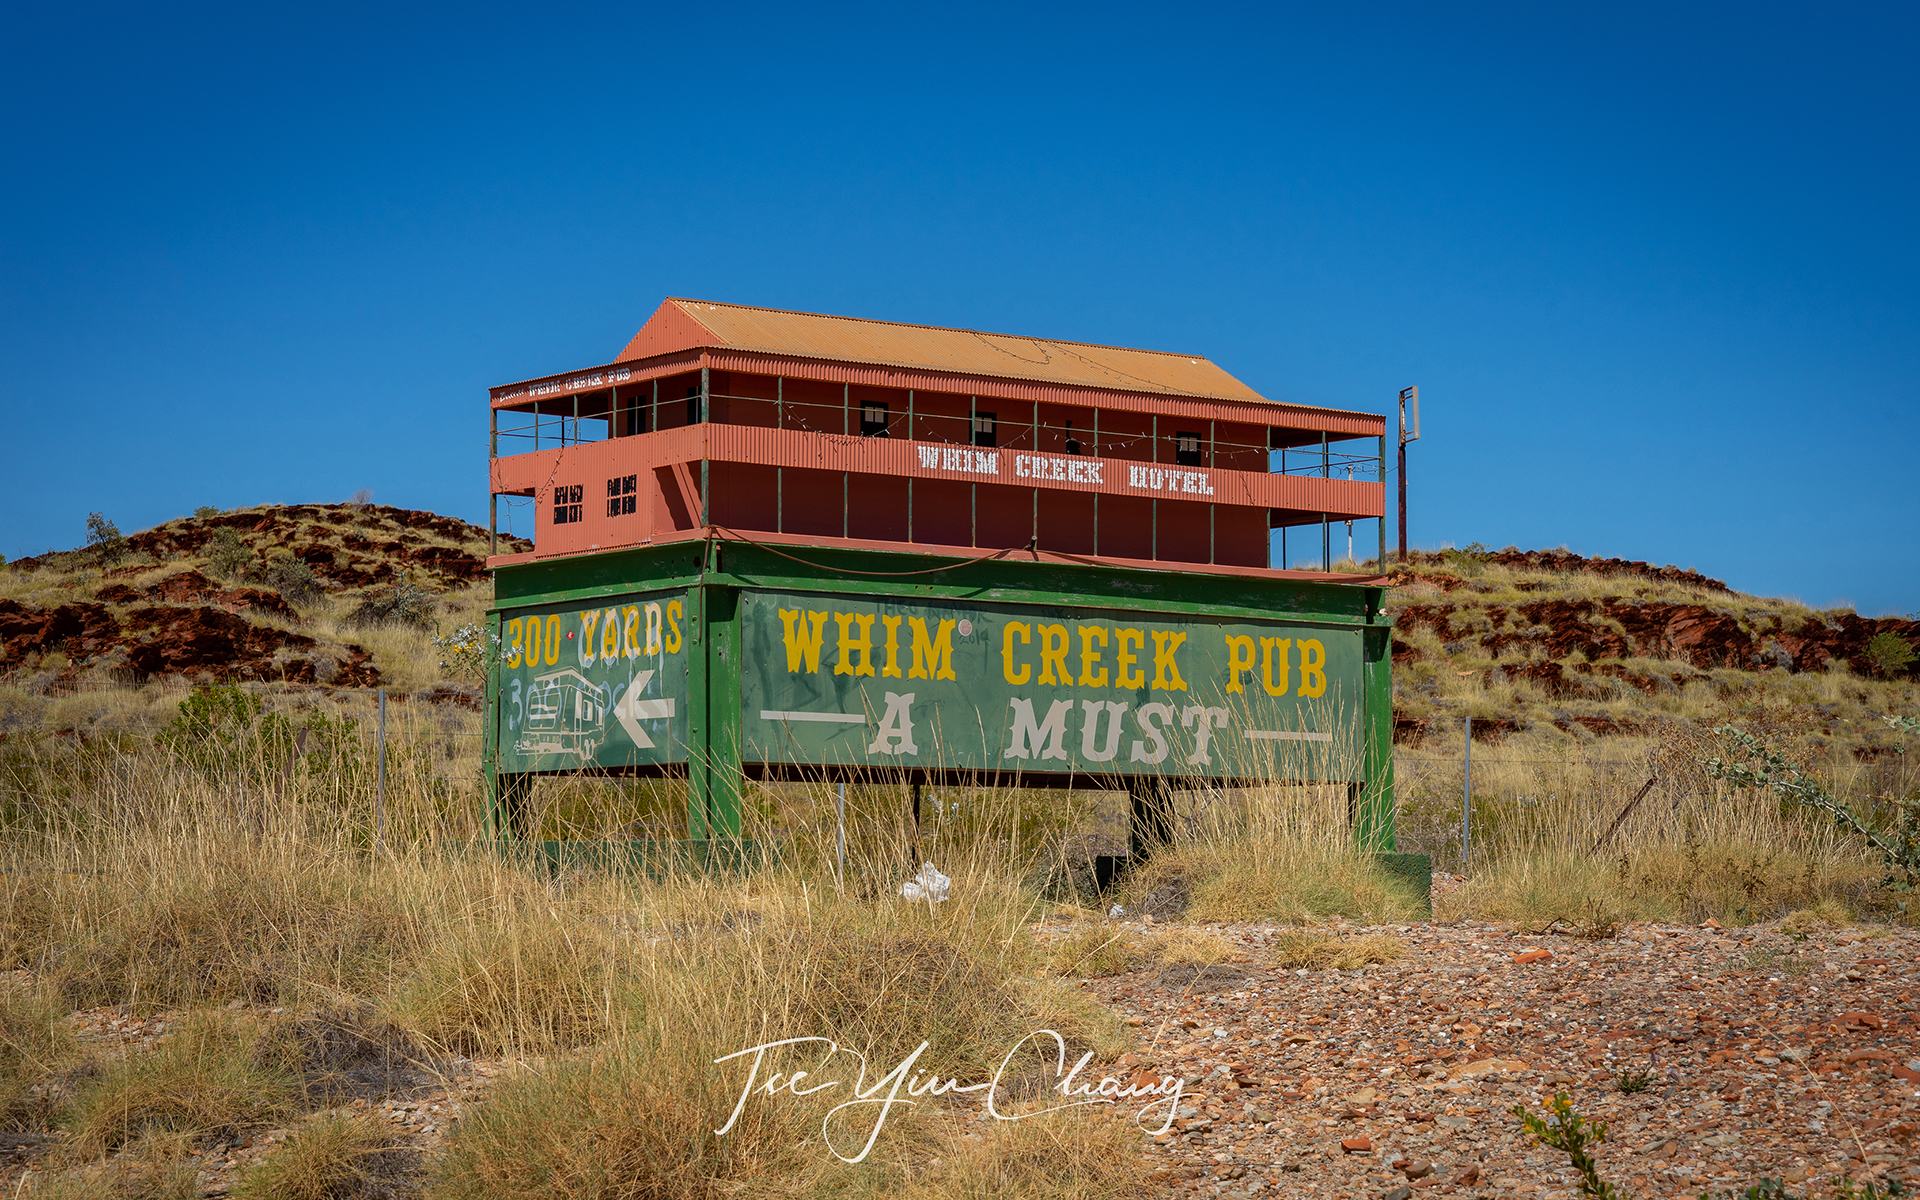 Whim Creek was once a thriving town established to service copper and gold mines in the region located on the North West Coastal Highway midway between Karratha and Port Hedland